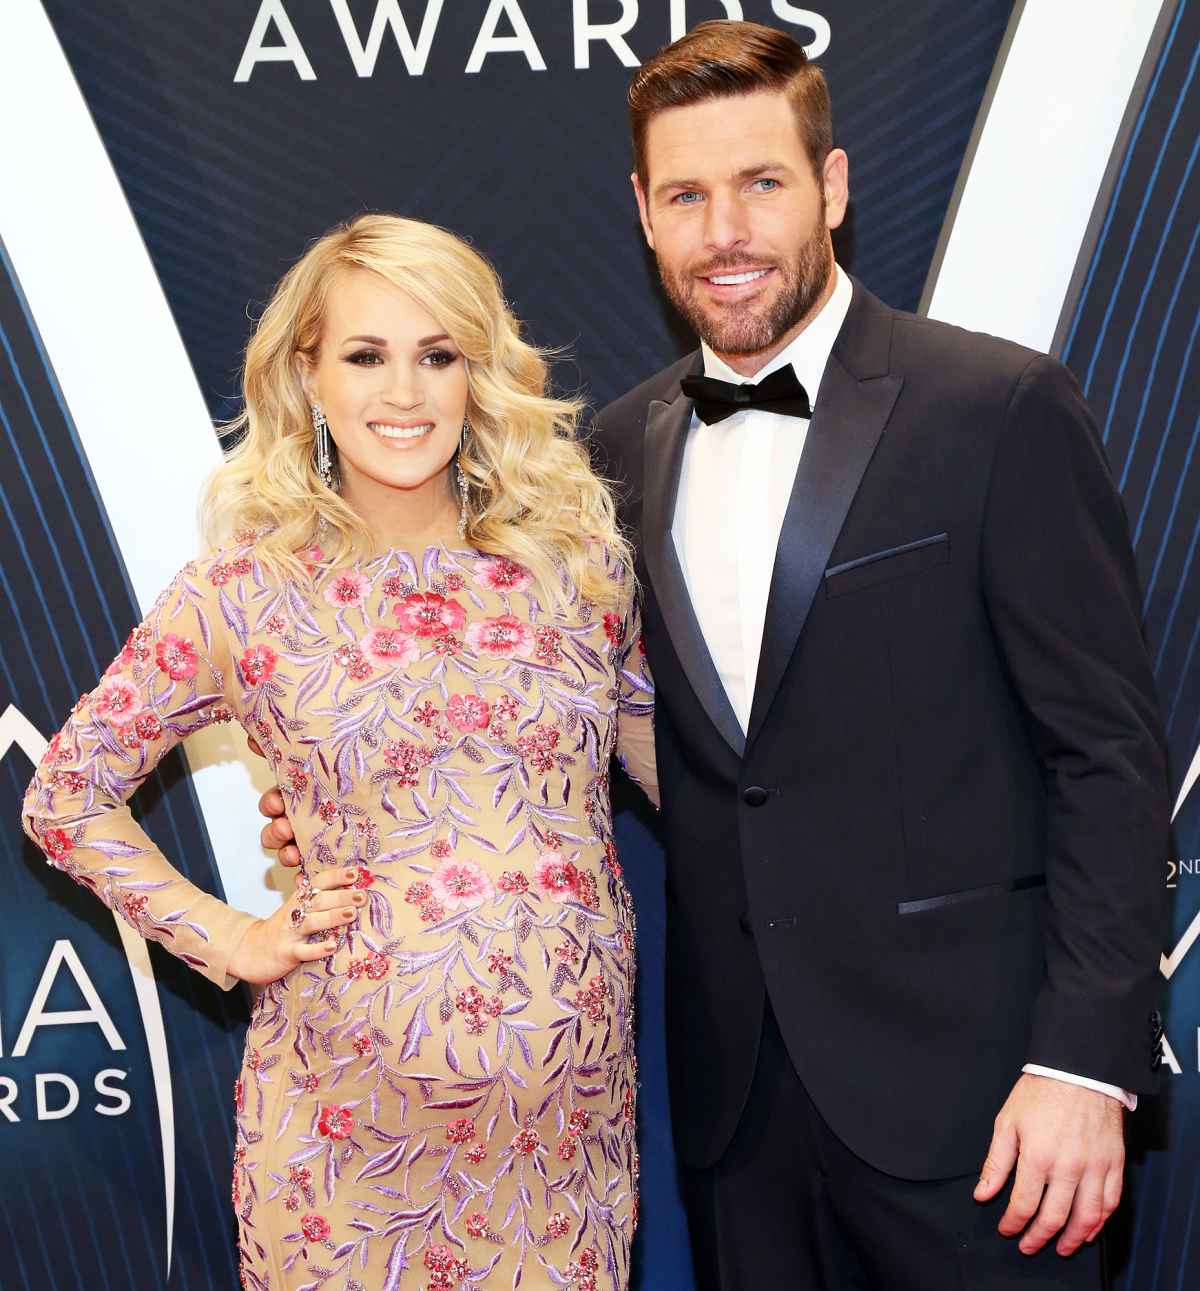 Carrie Underwood marries hockey player Mike Fisher